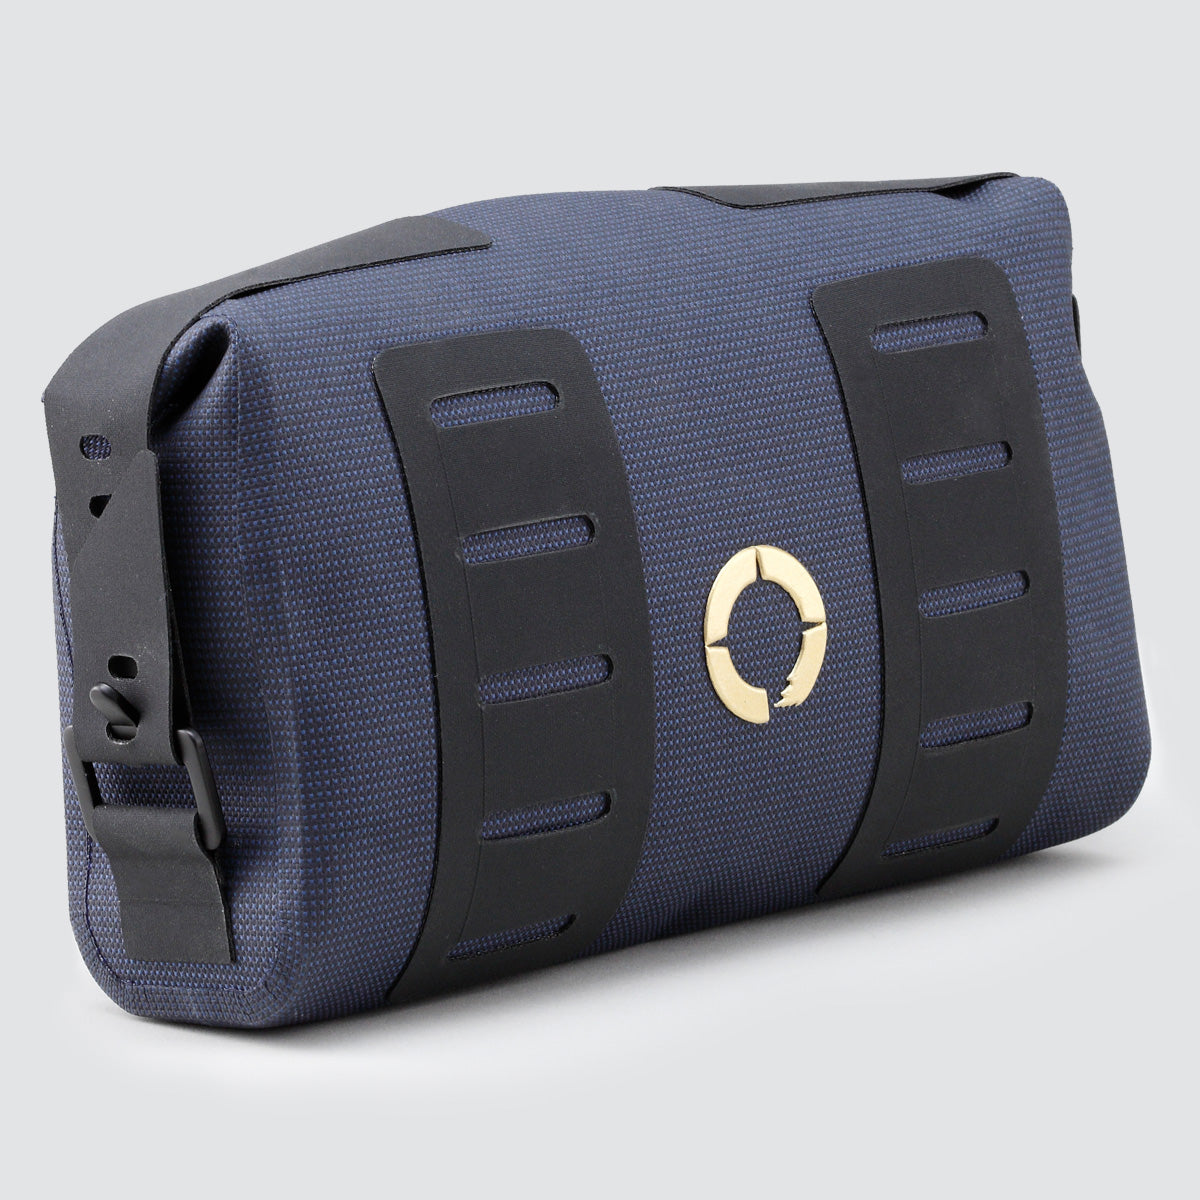 Off-Road Tool Pouch – Roswheel